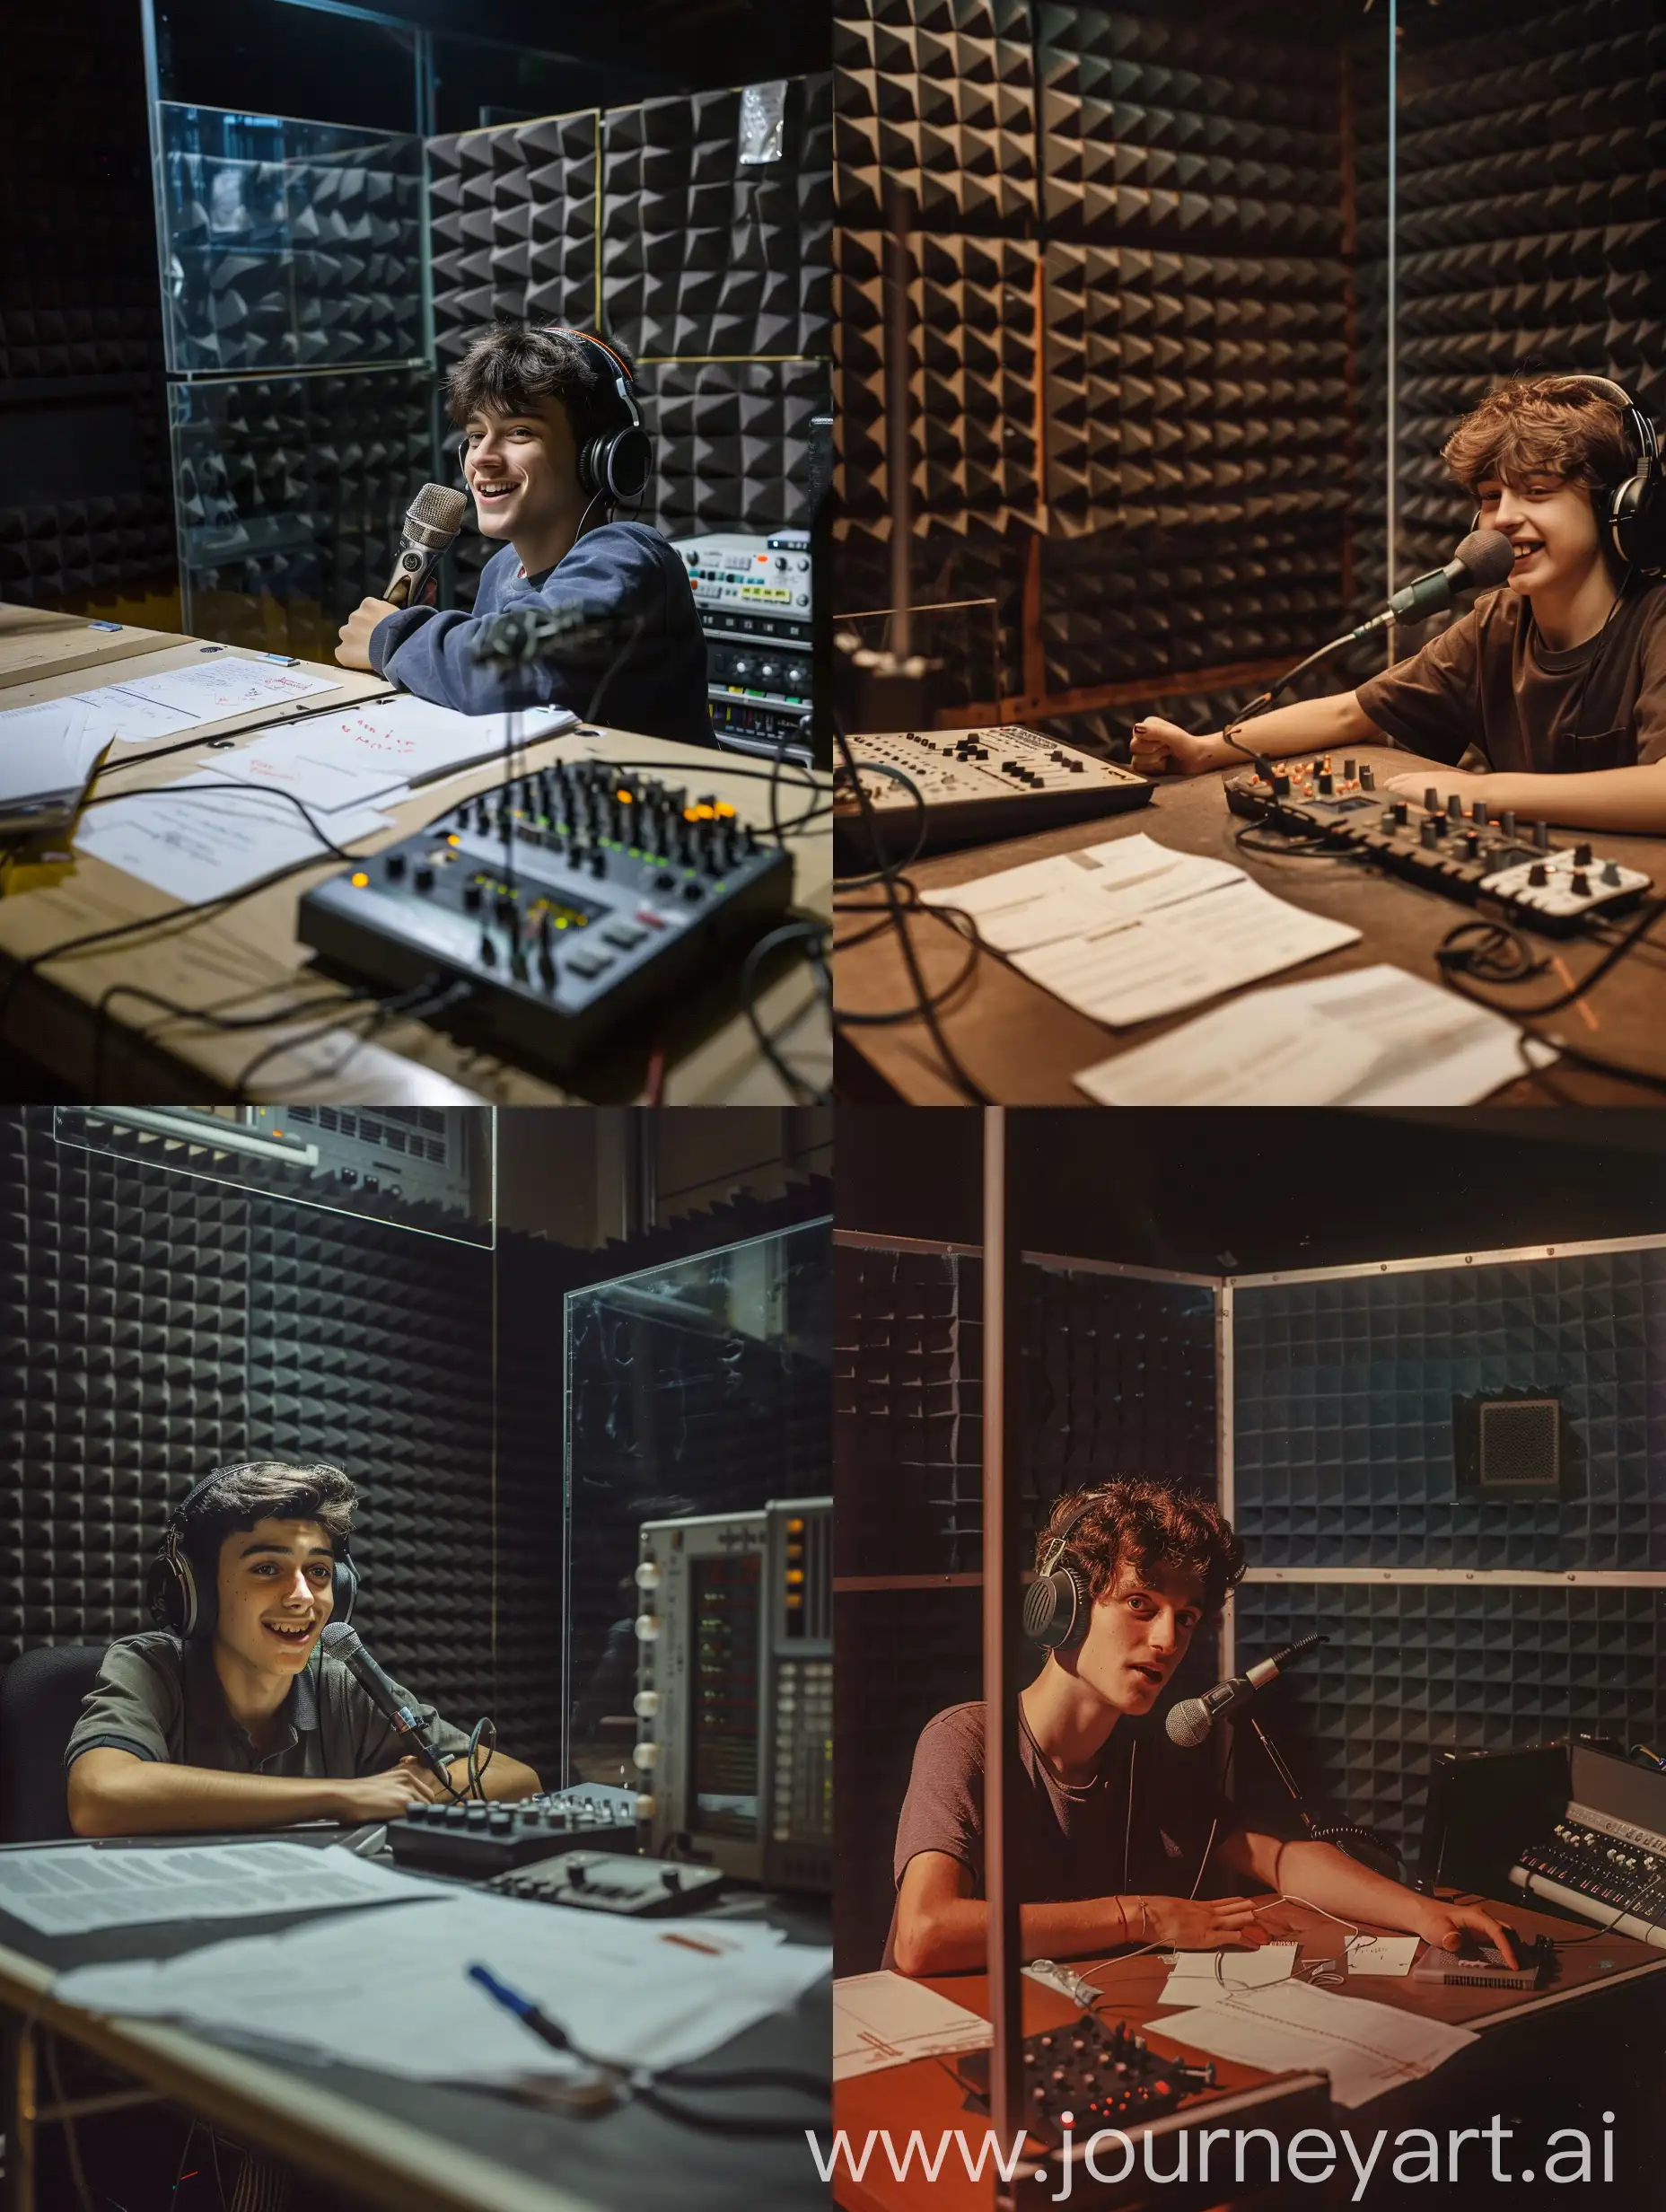 A young 23 year old Italian male radio speaker speaking into the microphone, in his small radio broadcast room. The room is small, empty and the walls are covered in sound-absorbing material. The boy is wearing a pair of headphones, his arms are resting on the table and next to him there are some sheets of notes and a small audio mixer. In front of the speaker there is a large glass window that divides the room from the control room. The speaker has an amused face and is looking down to the side towards the camera. The photo is in color with a dark atmosphere and the shot is close-up